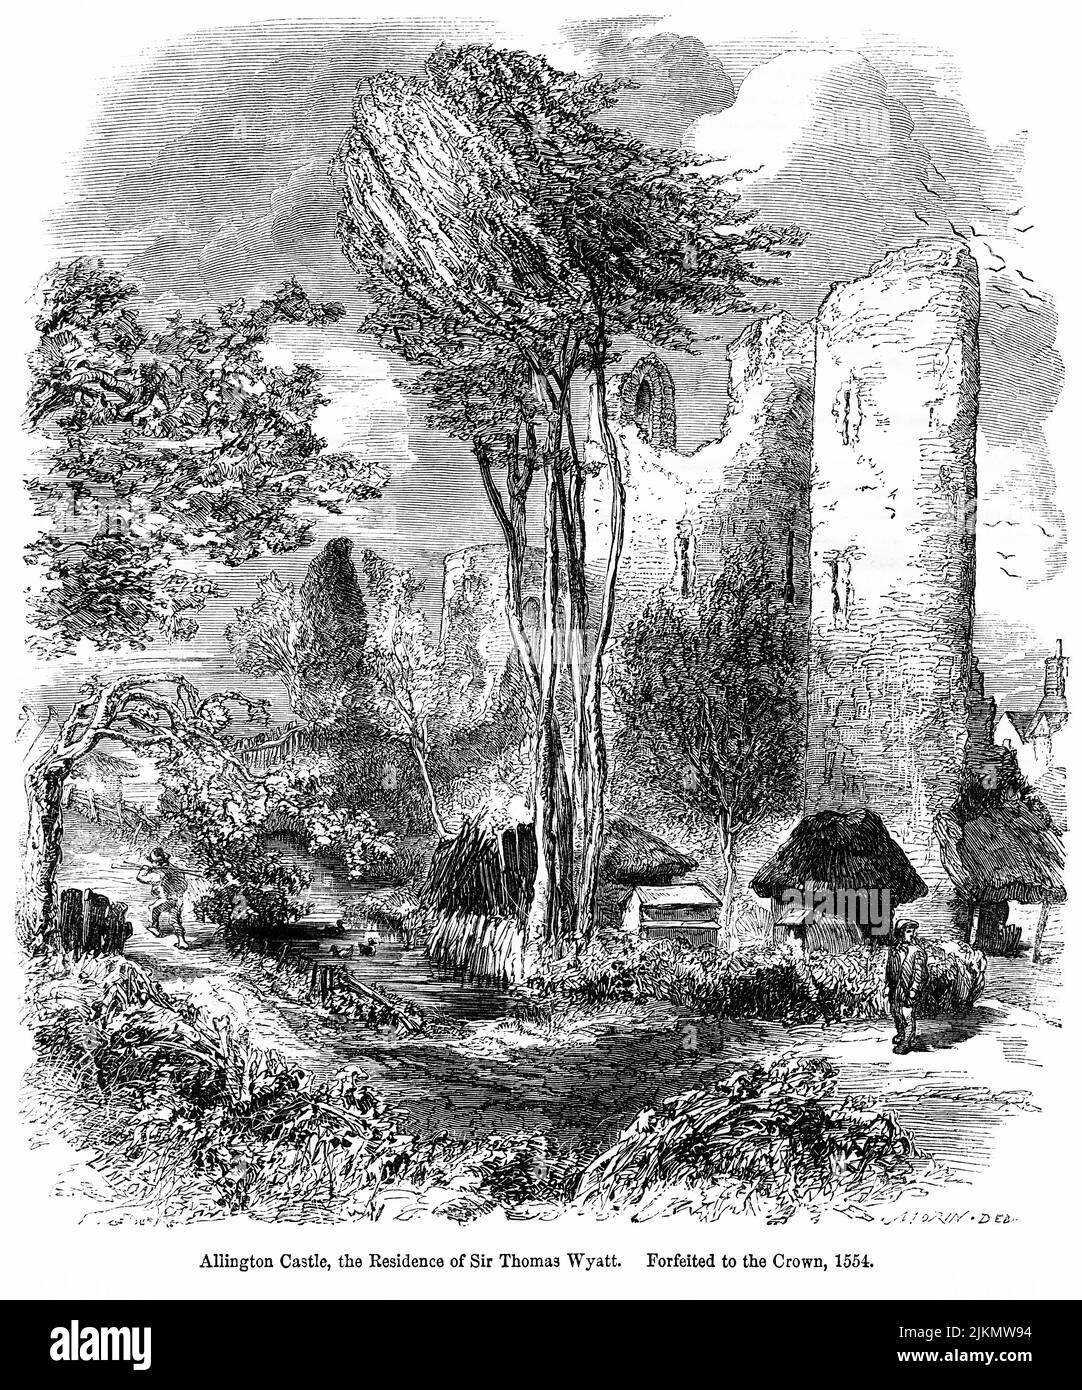 Allington Castle, the Residence of Sir Thomas Wyatt, forfeited to the Crown, 1554, Illustration from the Book, 'John Cassel’s Illustrated History of England, Volume II', text by William Howitt, Cassell, Petter, and Galpin, London, 1858 Stock Photo